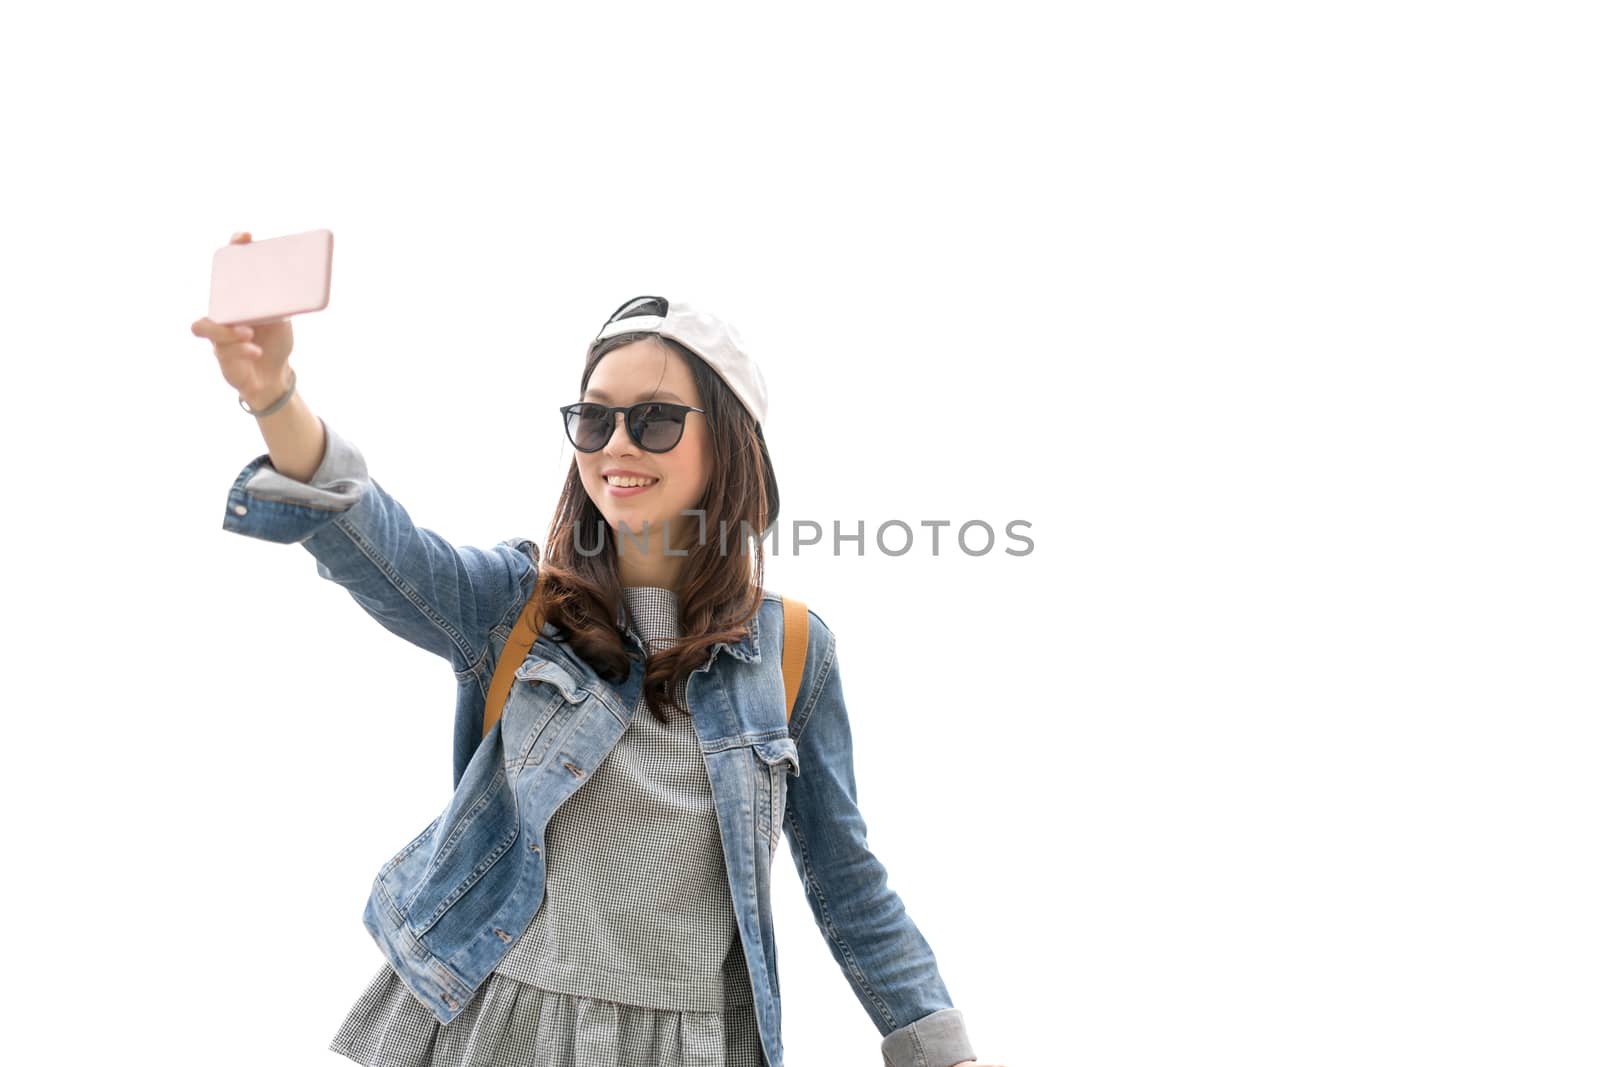 Beautiful Asian traveler woman taking selfie with the copy space, isolate on white background, travel concept